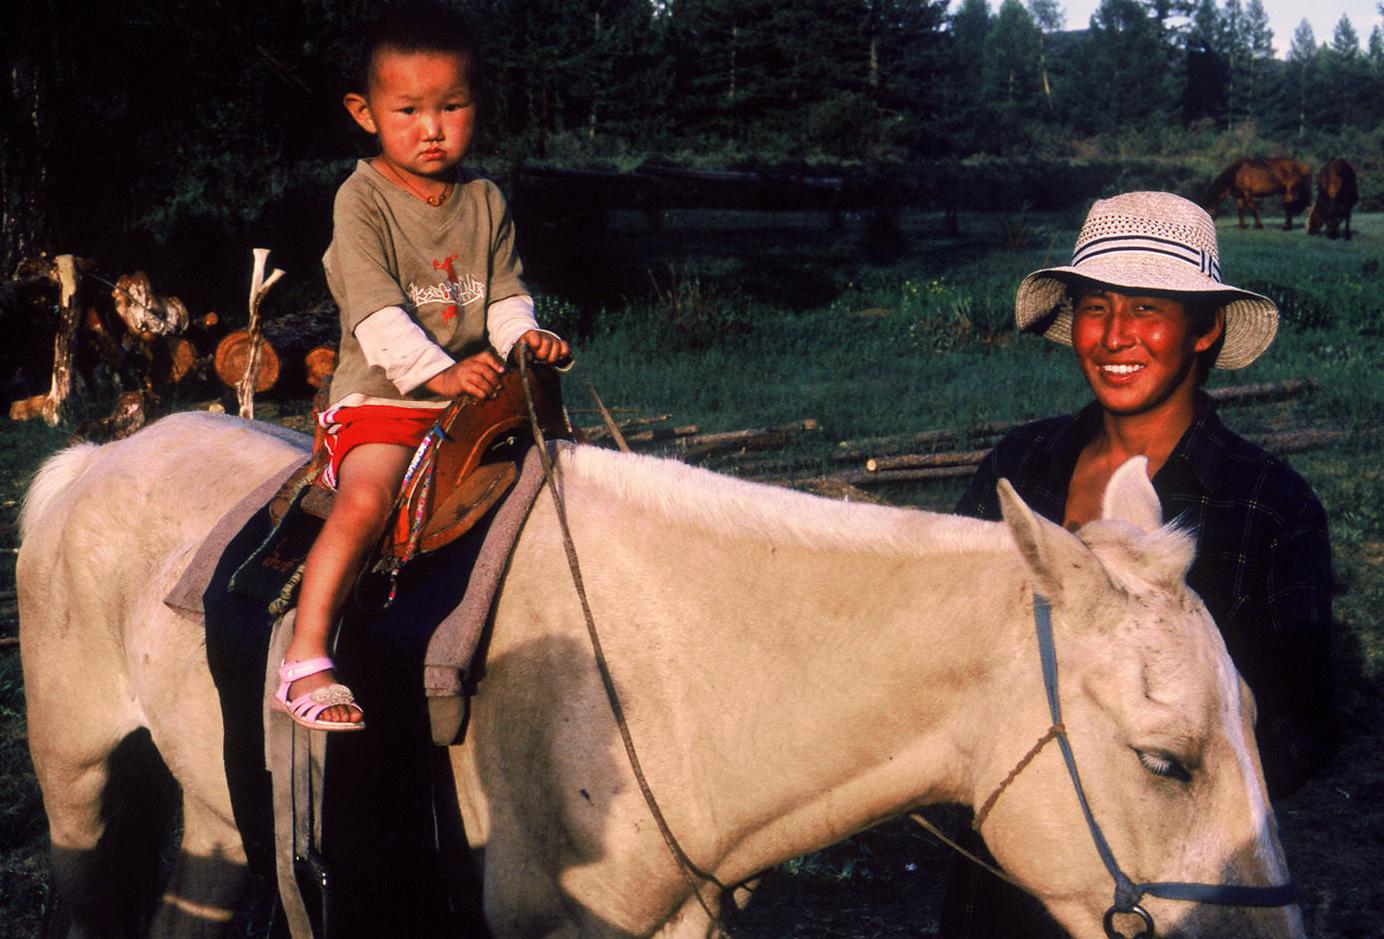 Kids learn to ride very early on, as they are in charge of breaking young horses.